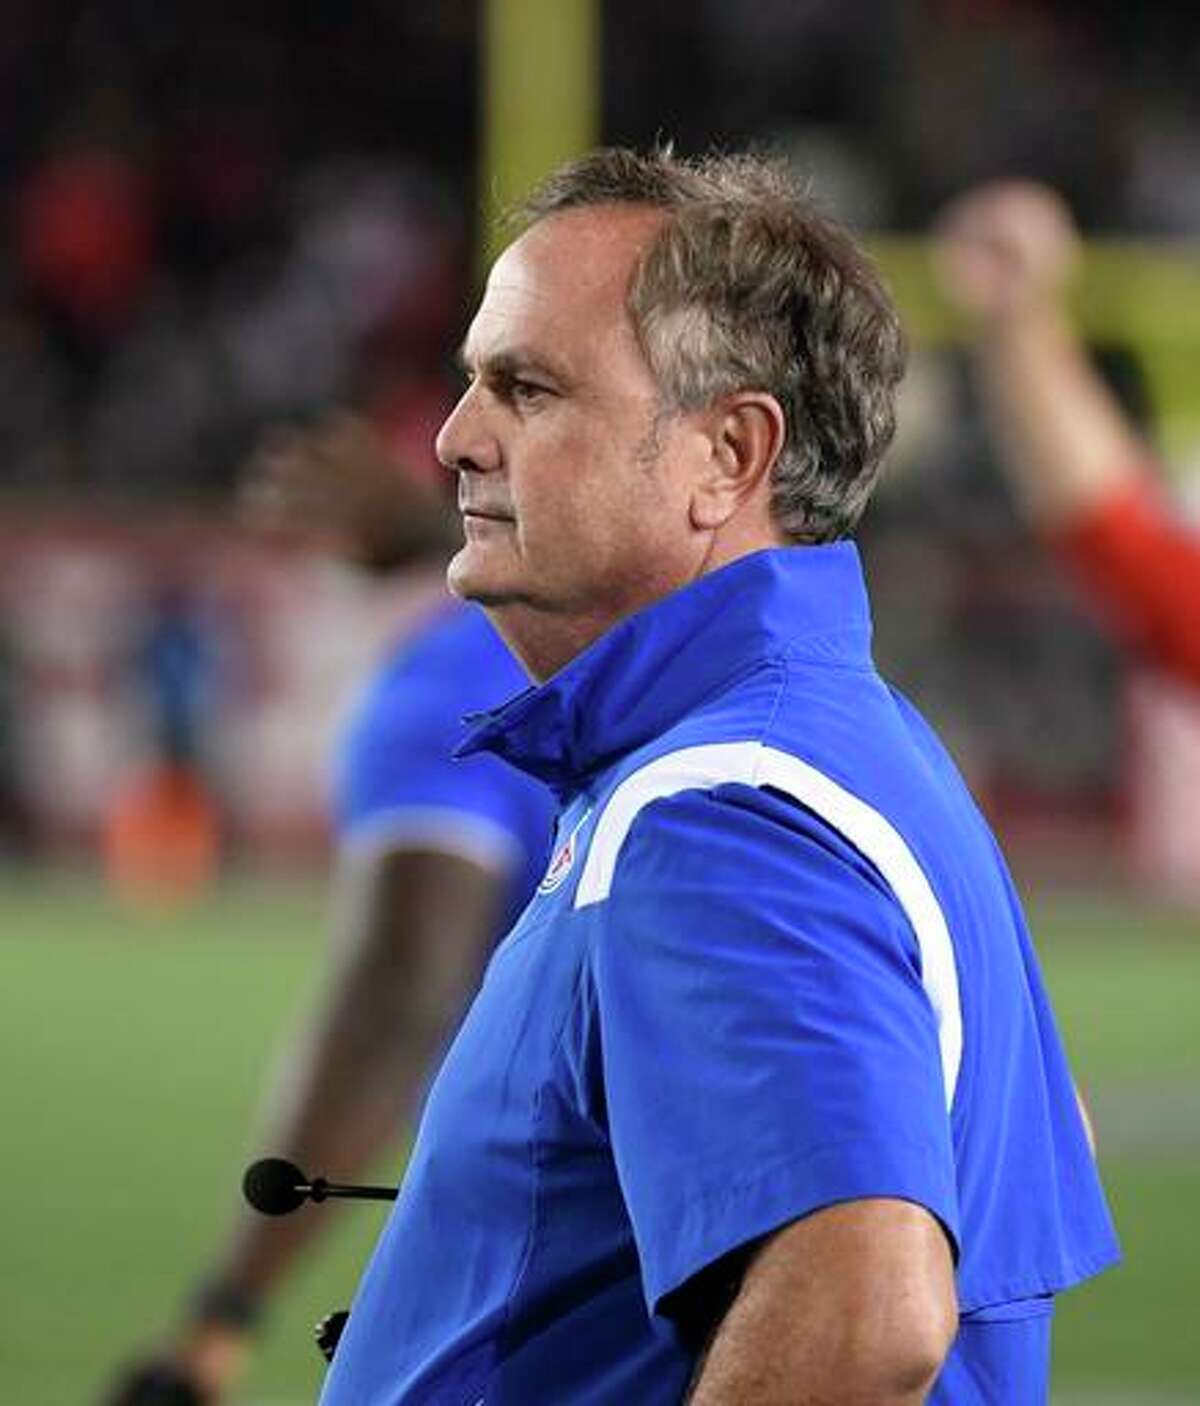 Sonny Dykes is 30-17 in four seasons at SMU, including 25-9 in the past three seasons.